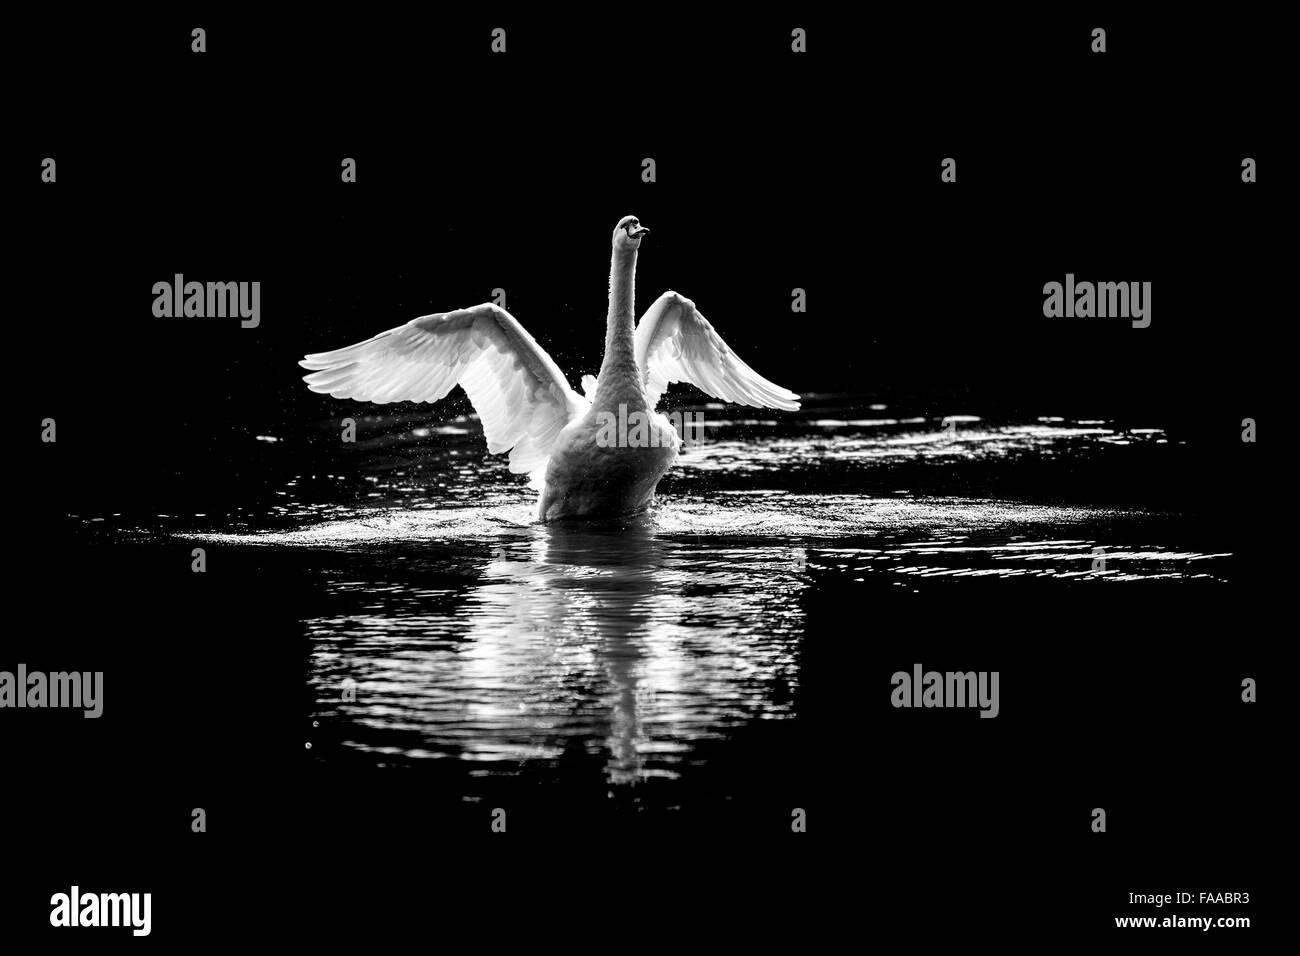 Swan taking off from a lake silhouette Stock Photo